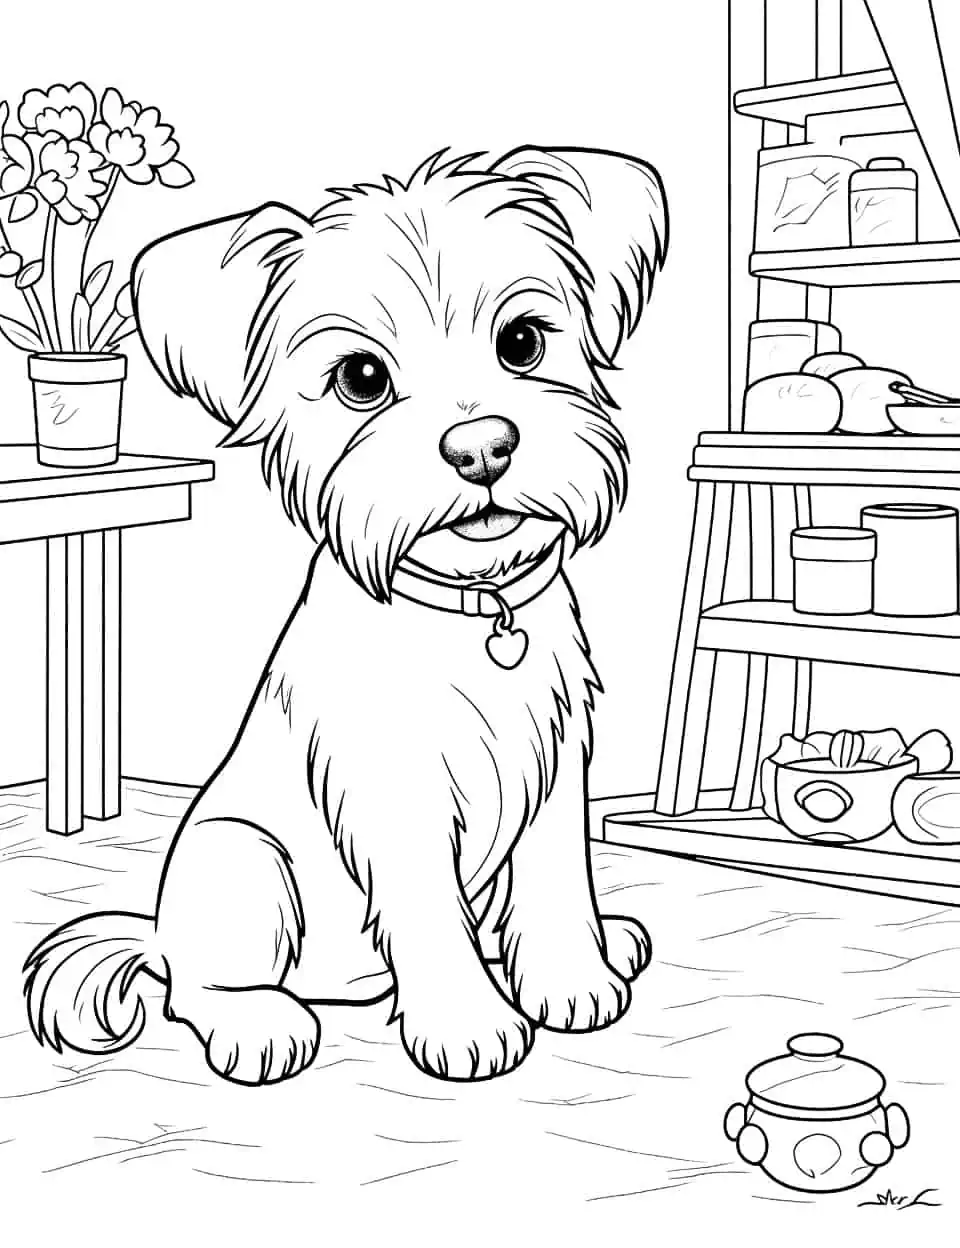 Yorkie in the Kitchen Dog Coloring Page - A pampered and groomed Yorkie sitting in the kitchen waiting for dinner.